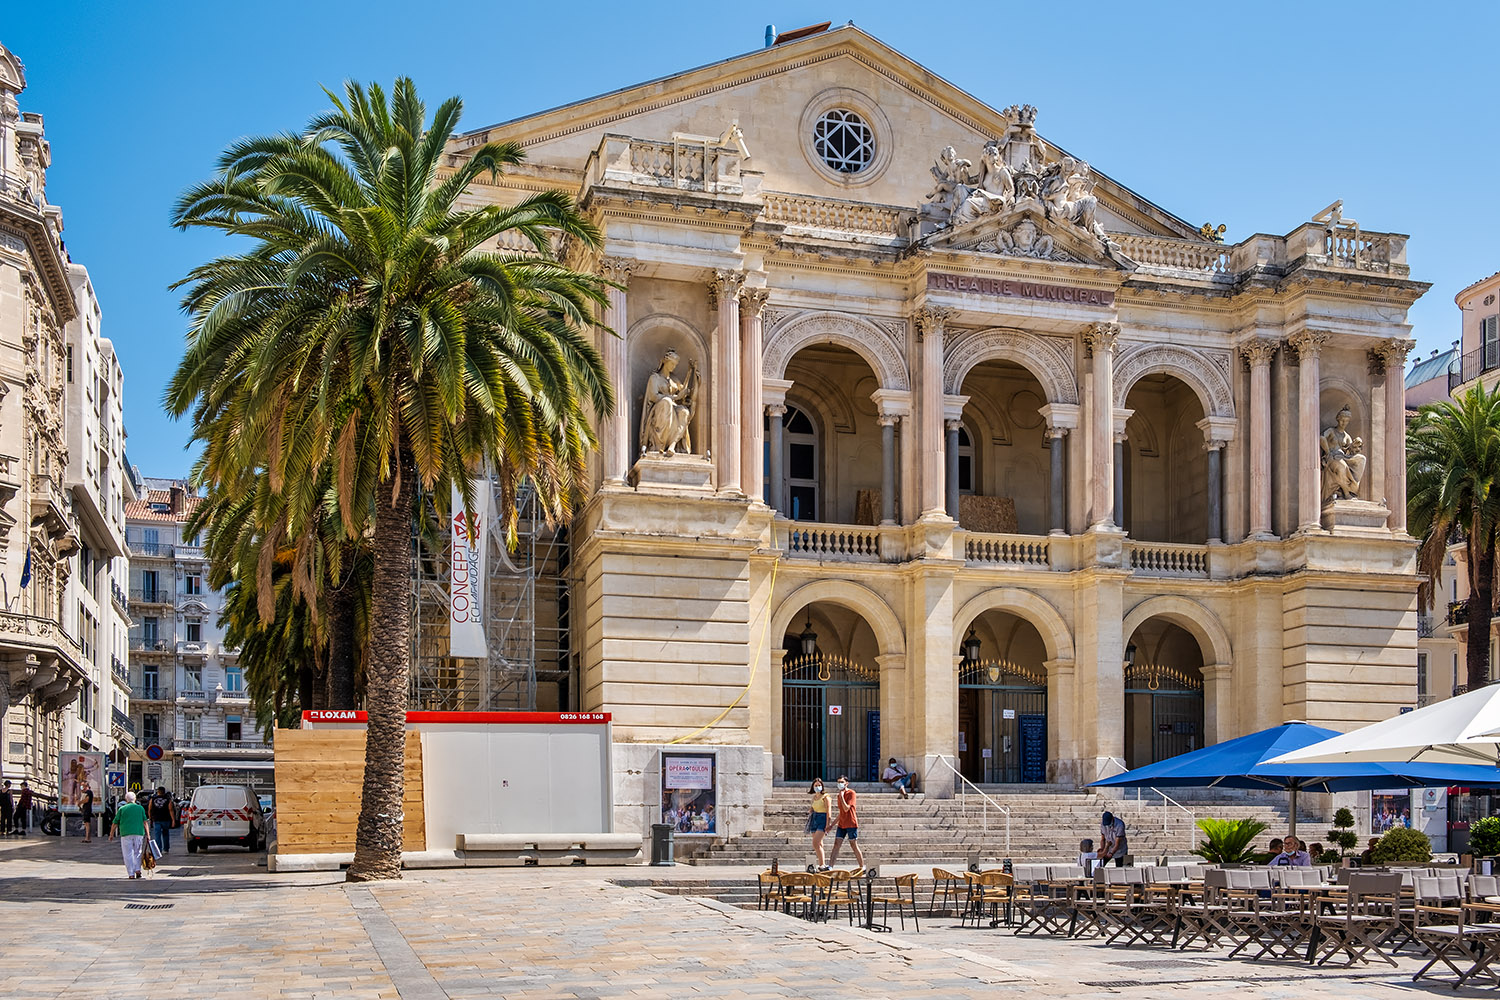 The Toulon Opera on the 'place Victor Hugo' is the second largest opera house in France after the 'Palais Garnier' in Paris